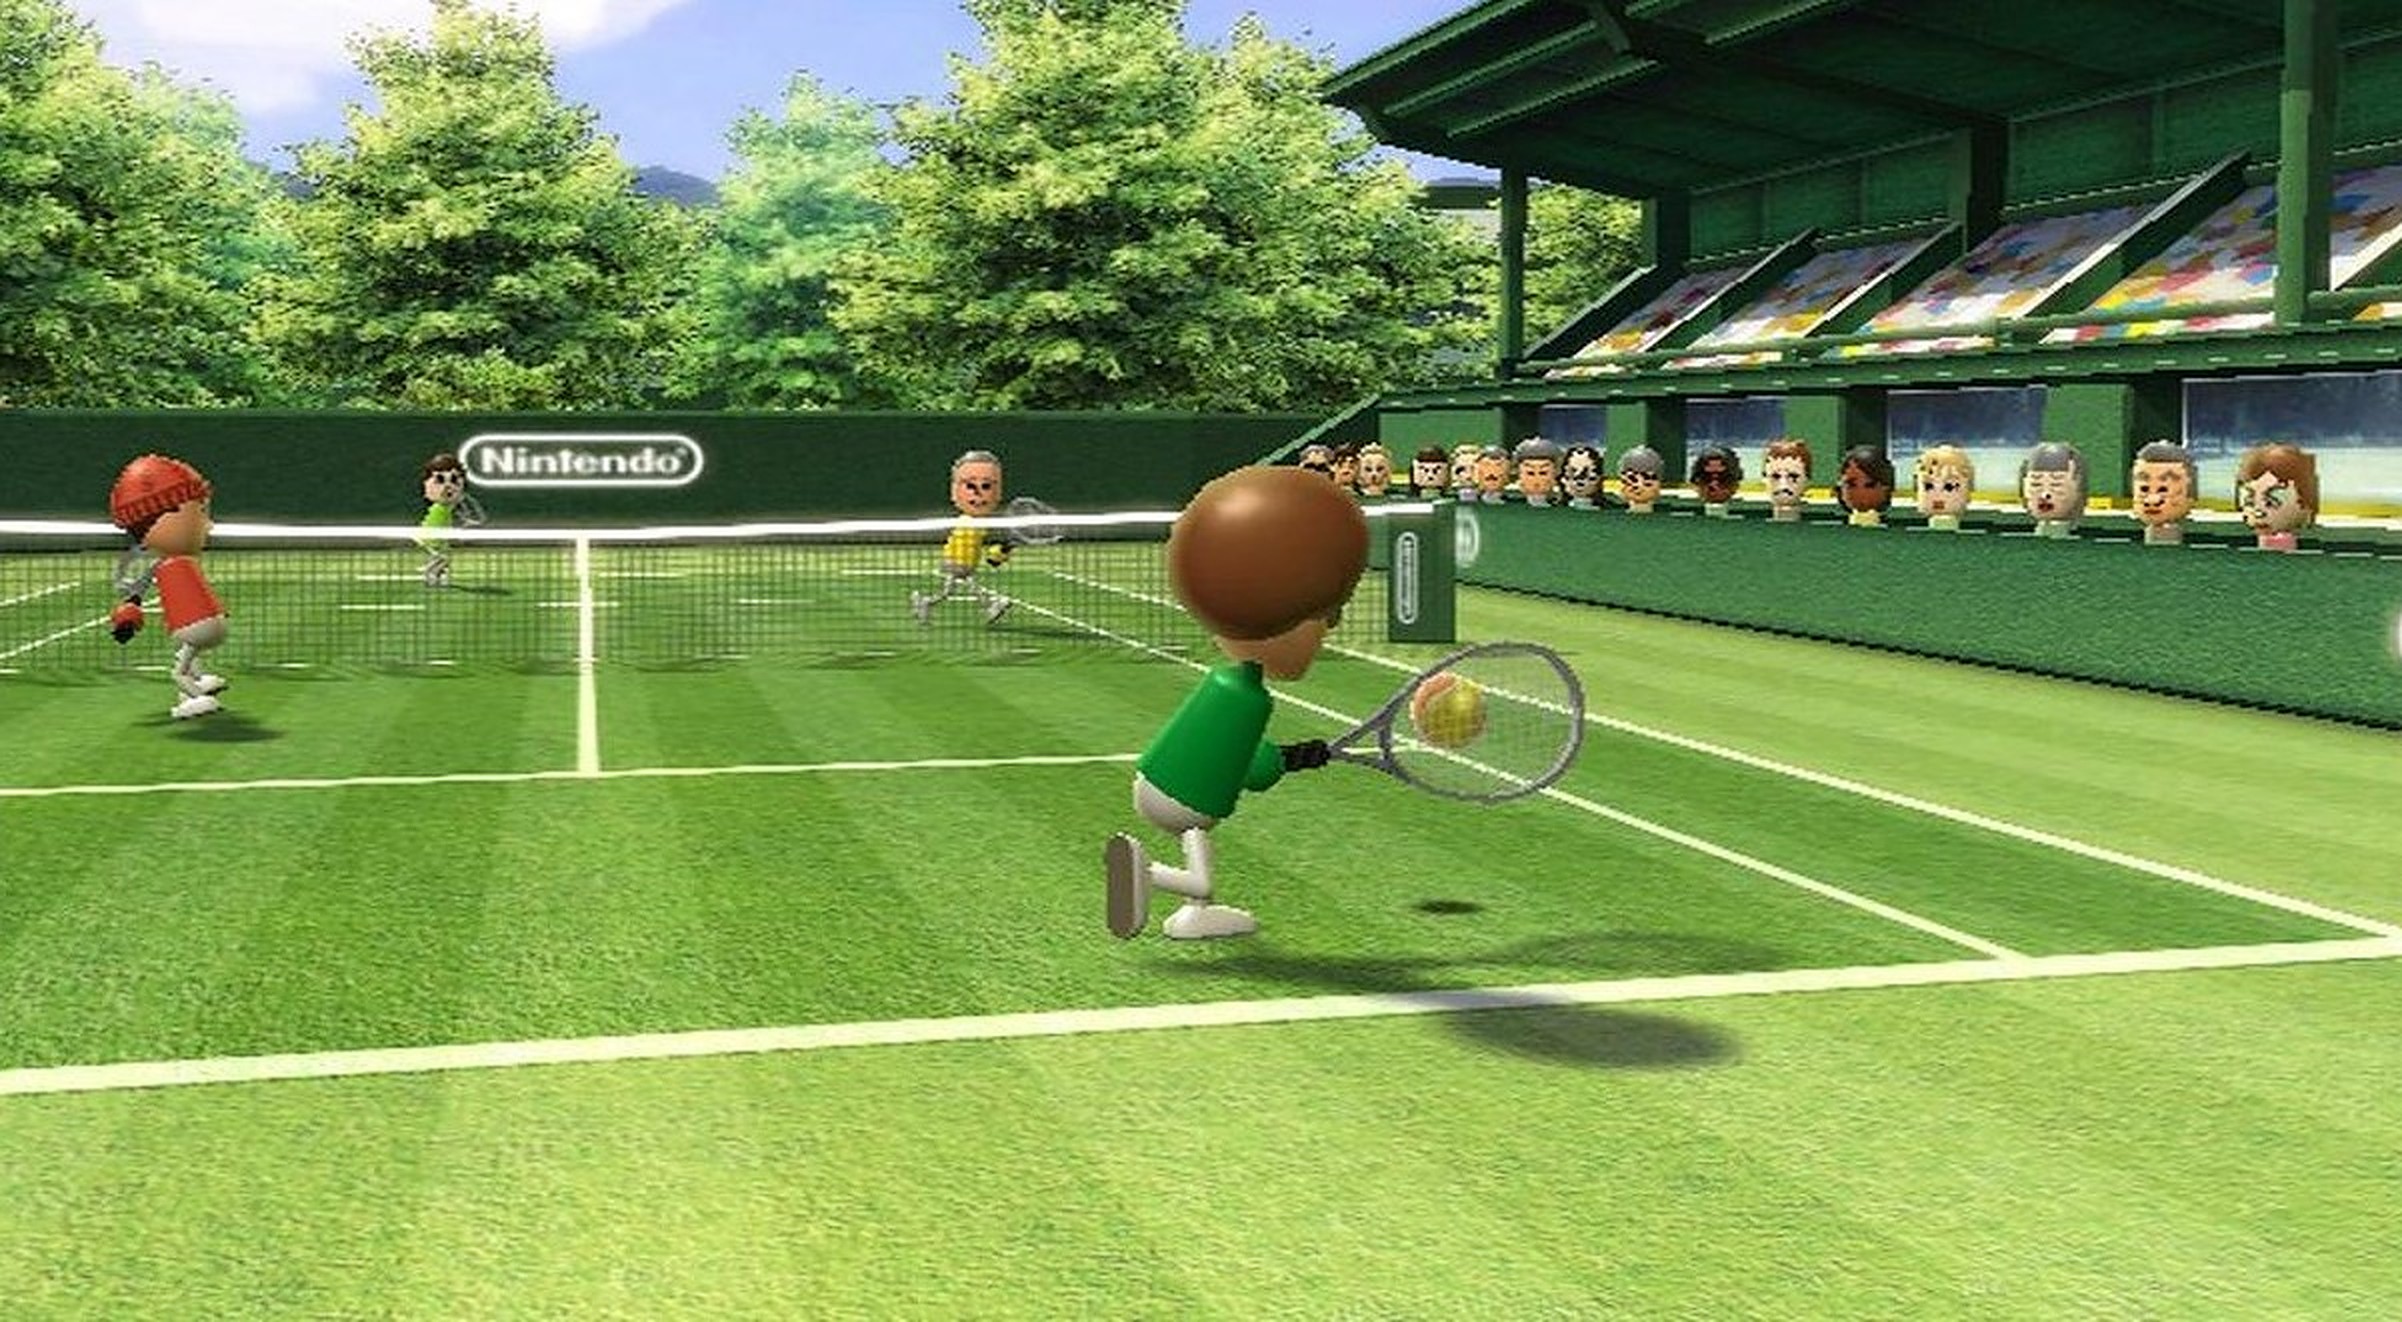 Why Wii Sports Is the Best-Selling Nintendo Game Ever | Den of Geek